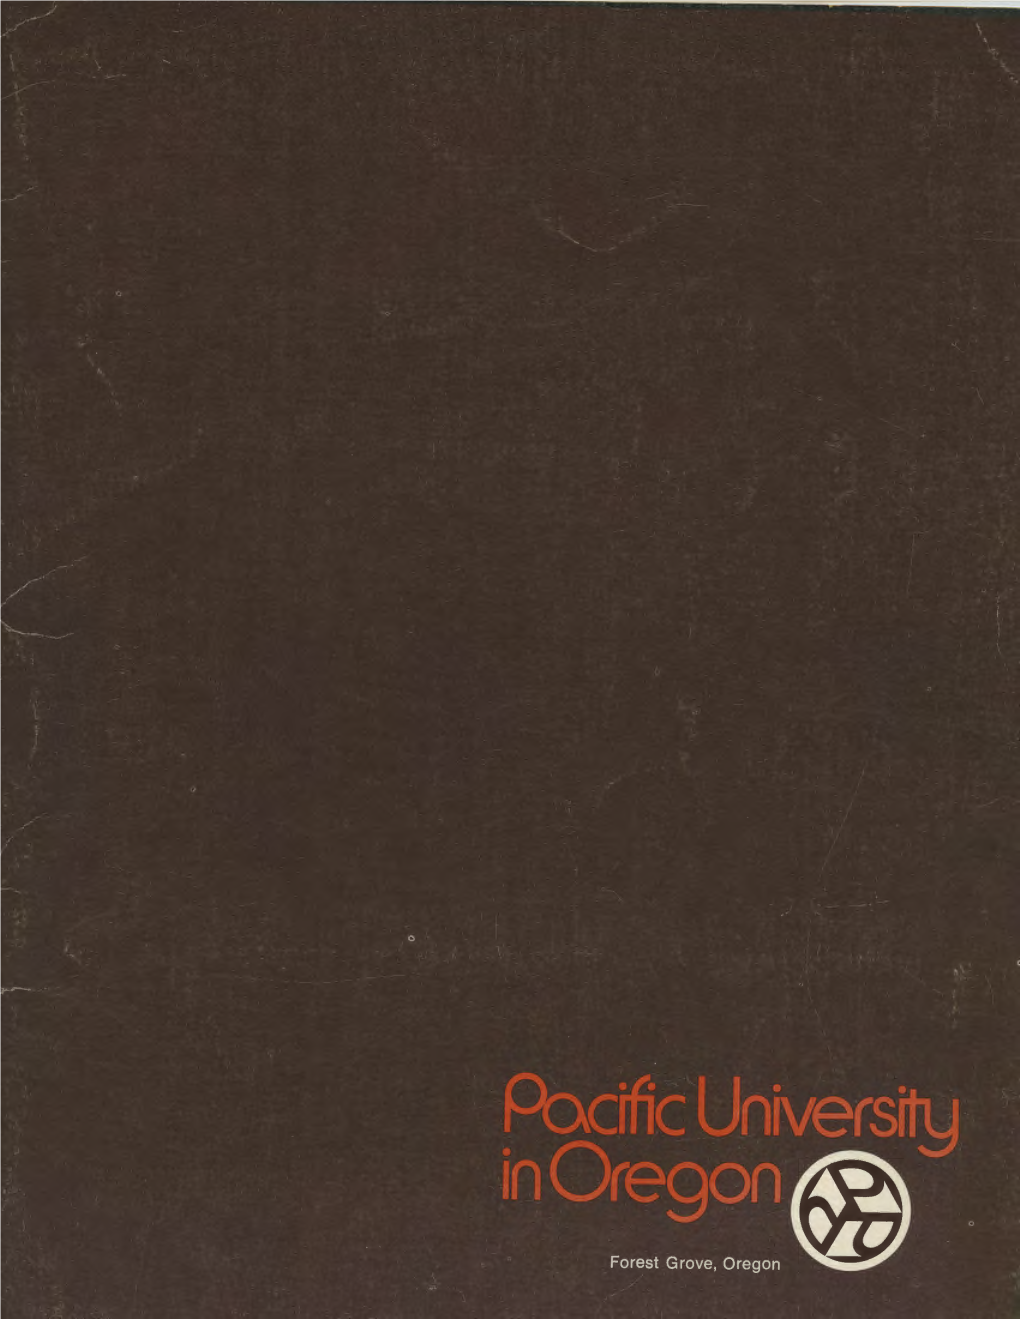 Promotional Folder for Pacific University with Maps and Fact Book